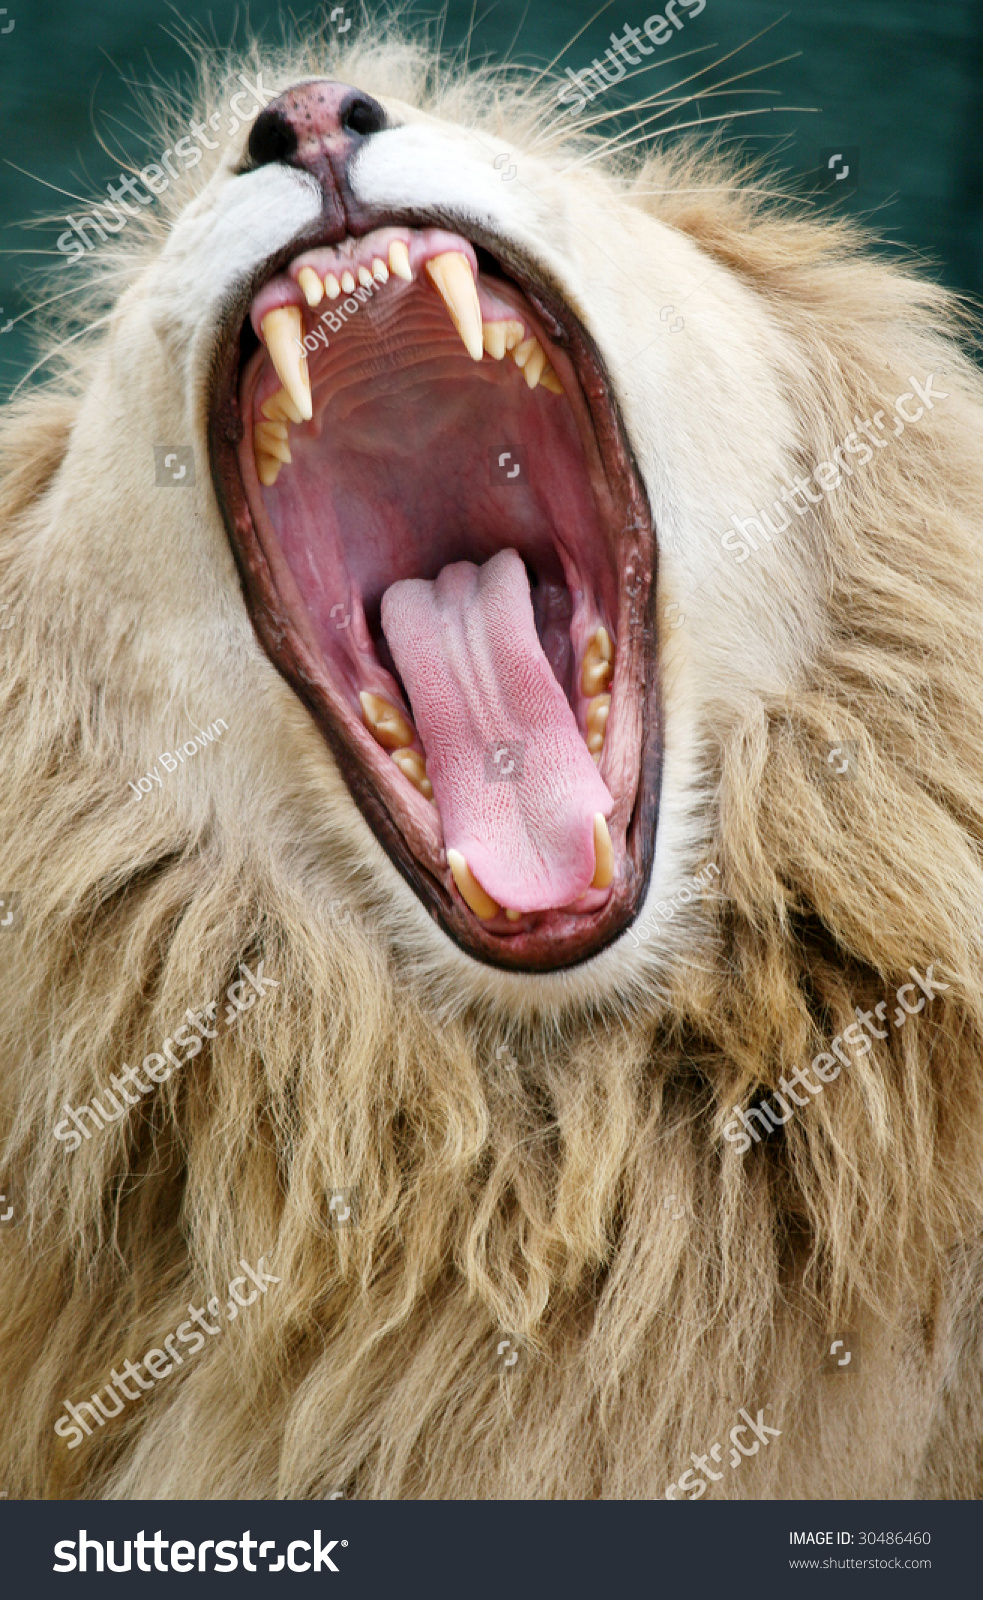 Lions Mouth Open 67